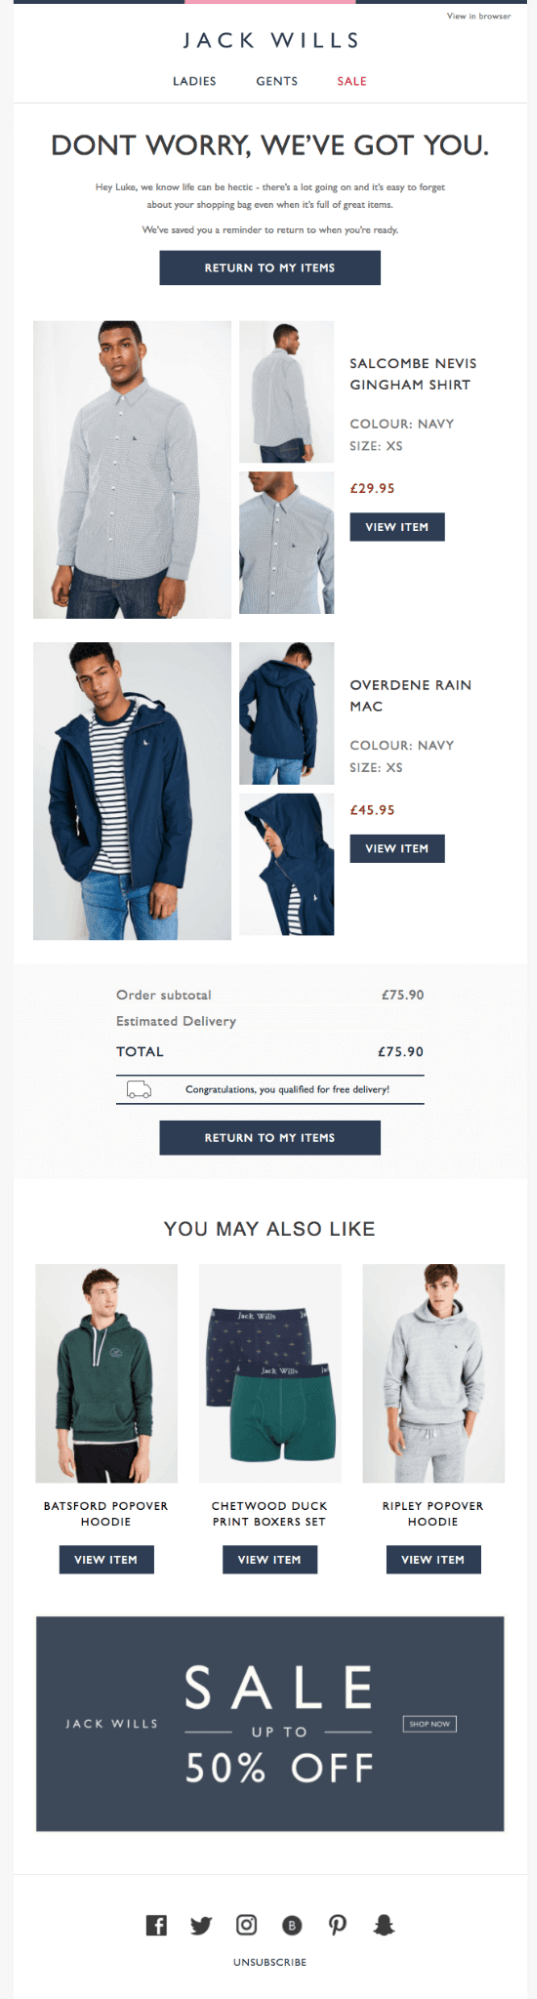 Jack Wills abandoned cart email